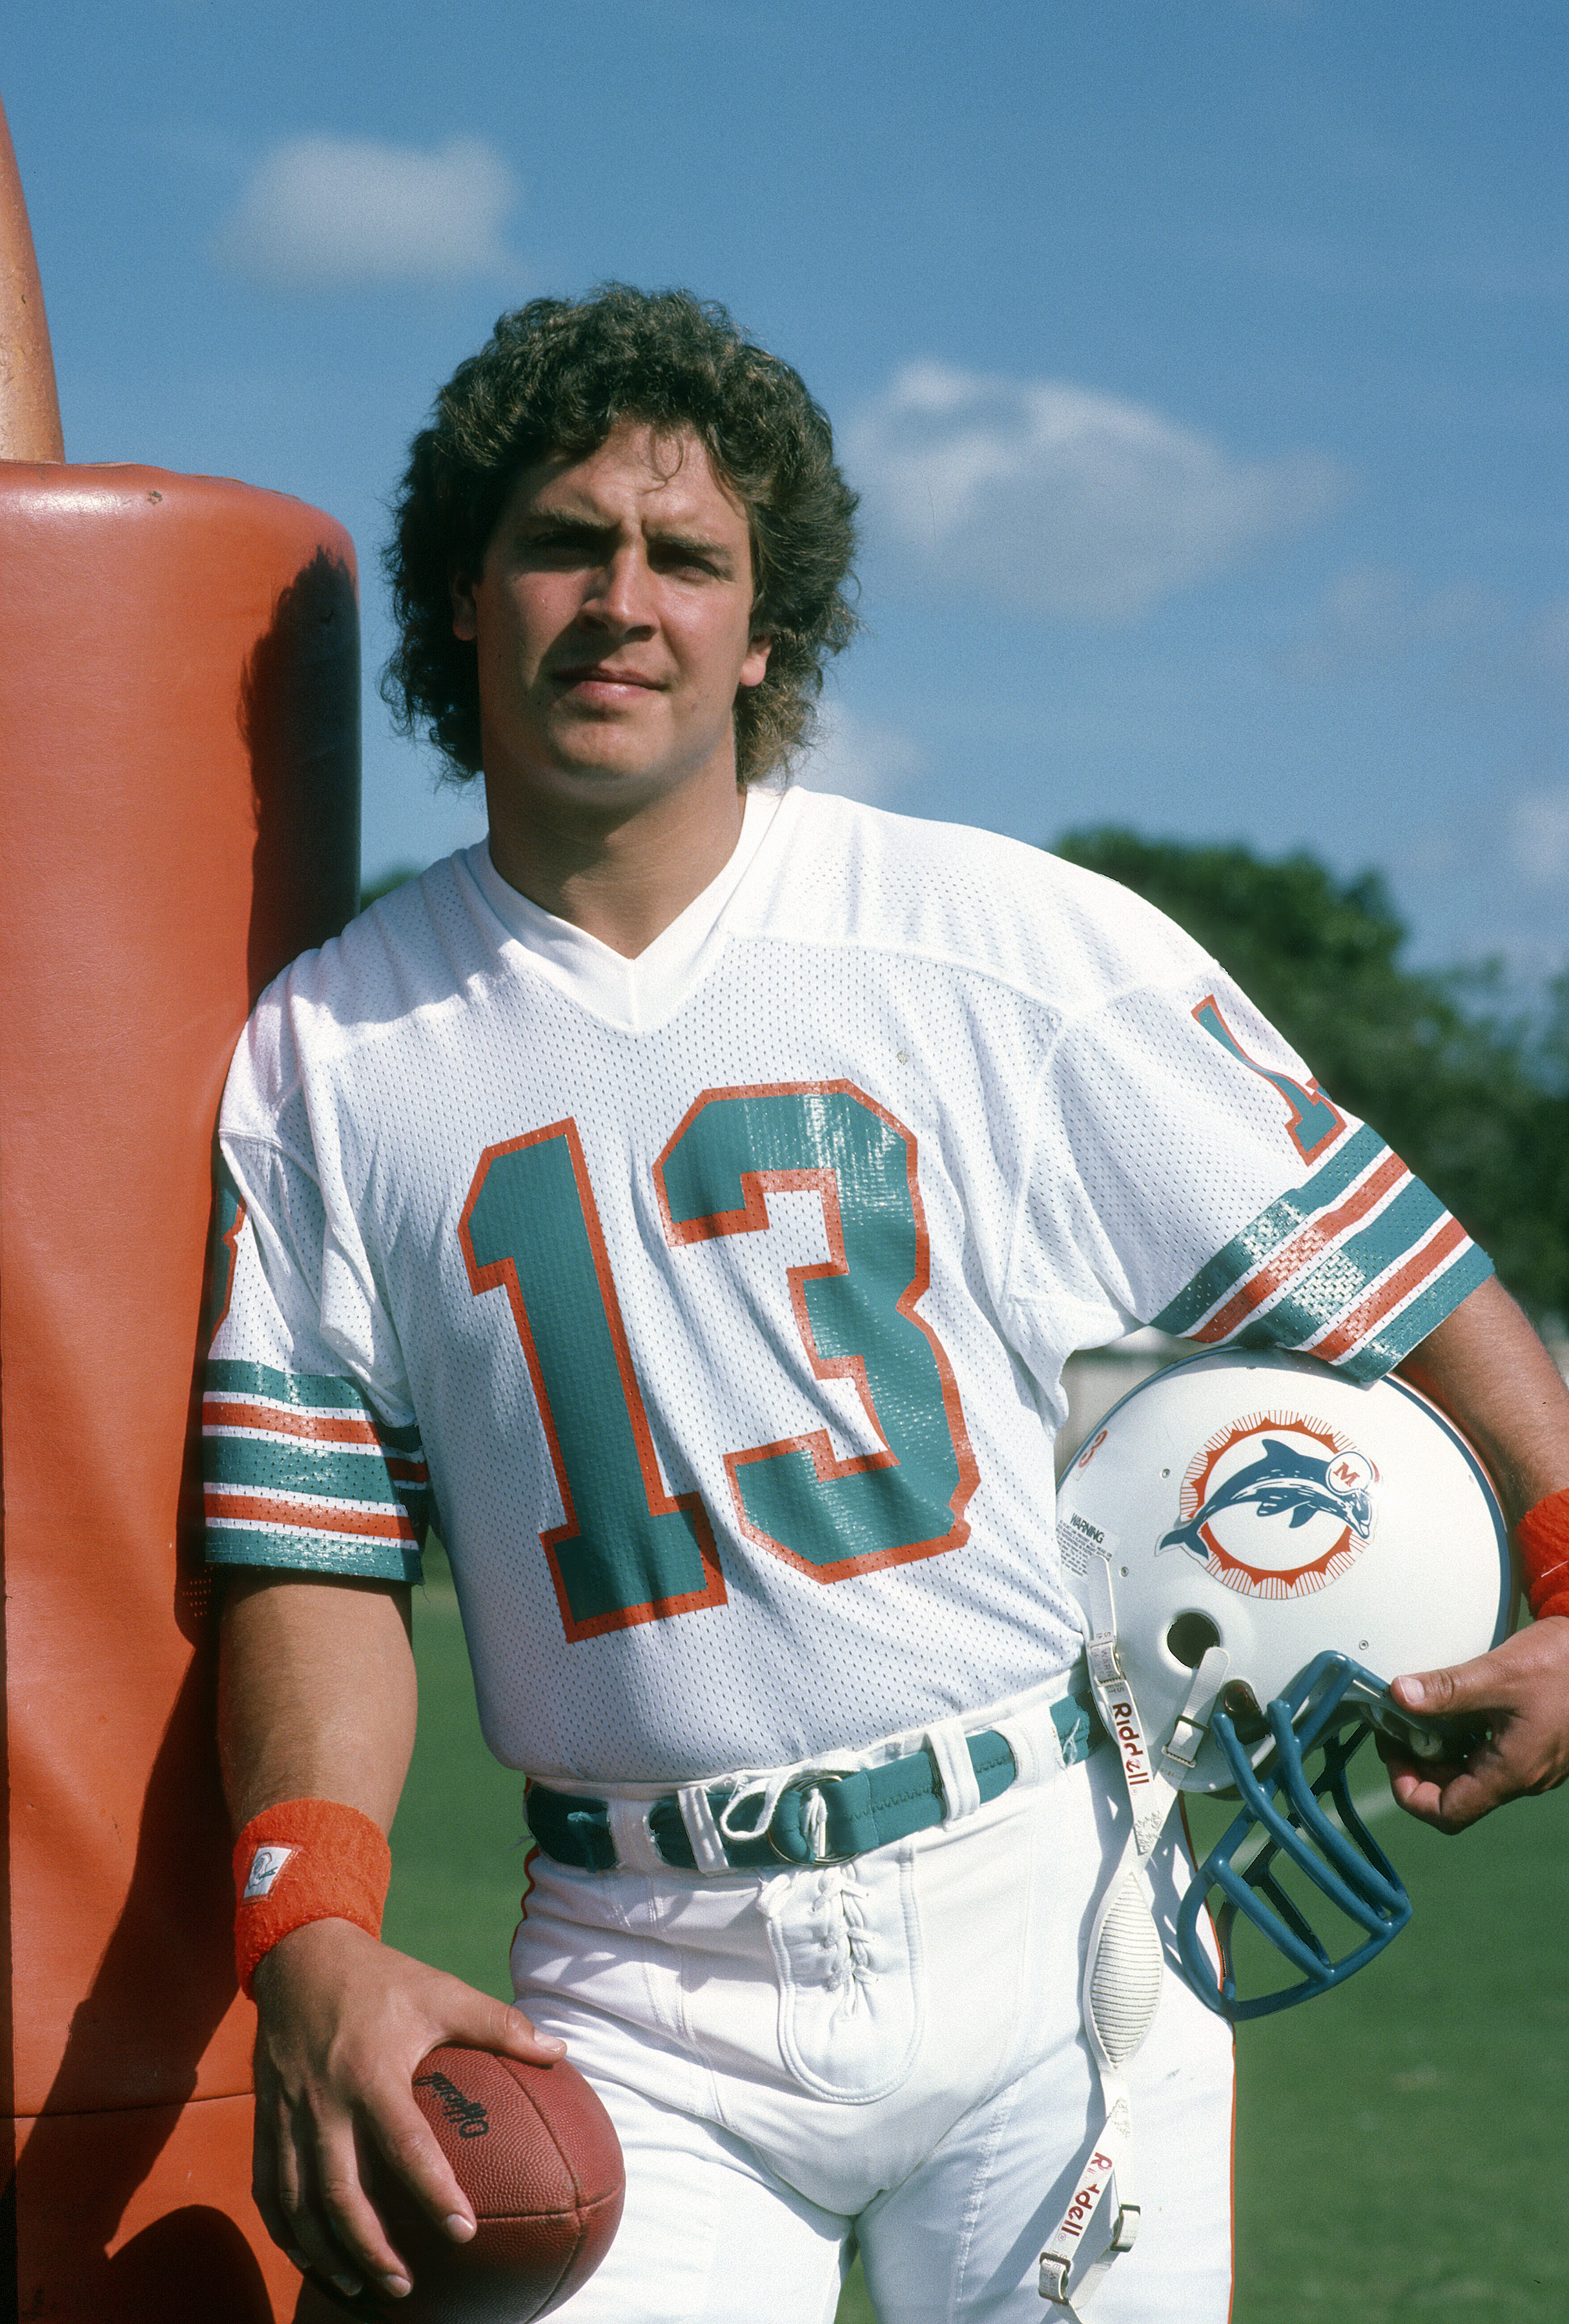 Dan Marino says he'd throw for 6,000 yards and 60 touchdowns in